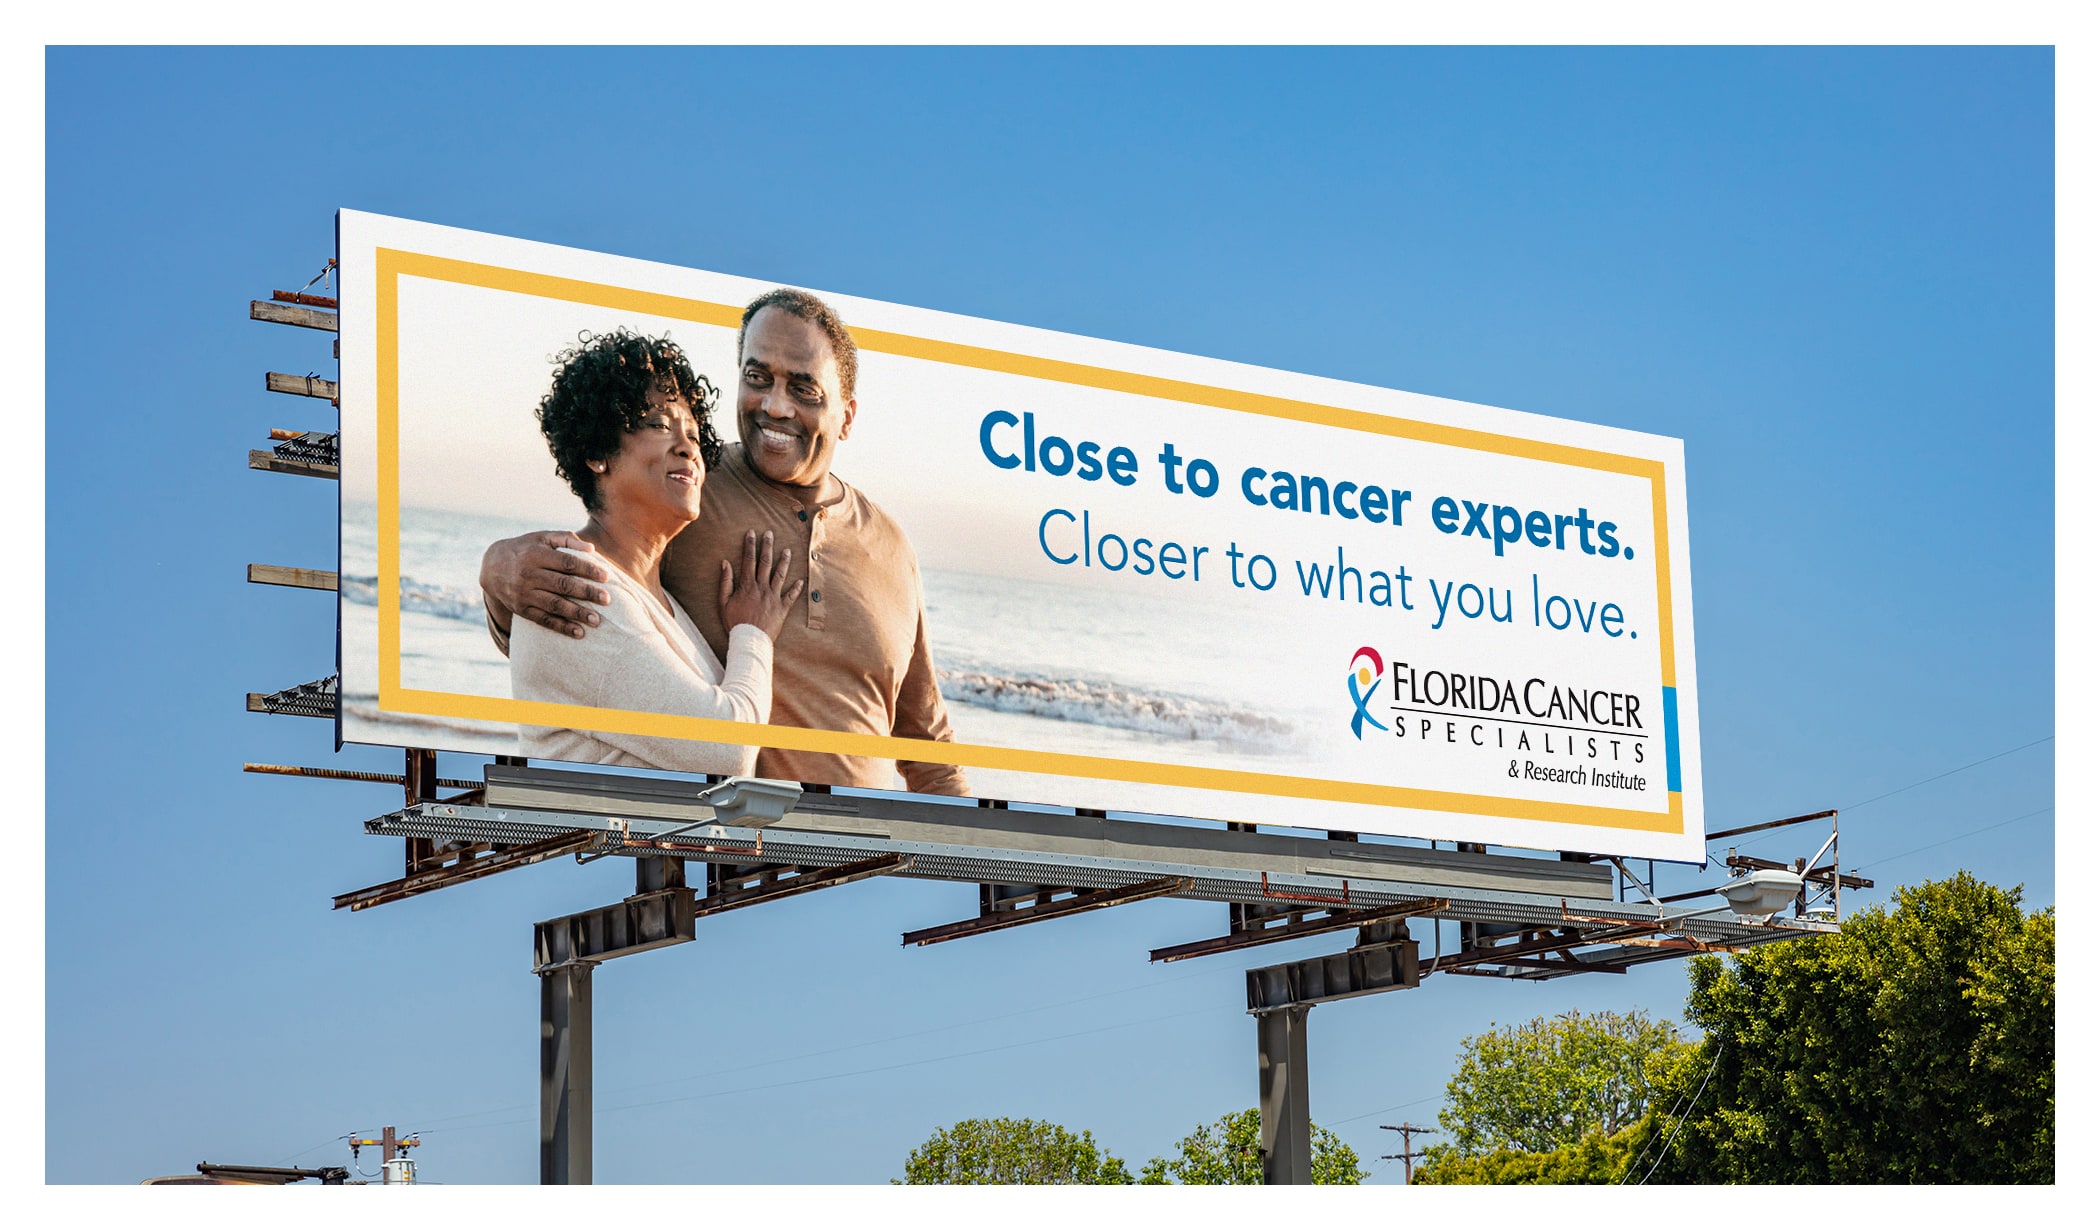 Billboard for Florida Cancer Specialists: Close to cancer experts. Closer to what love.